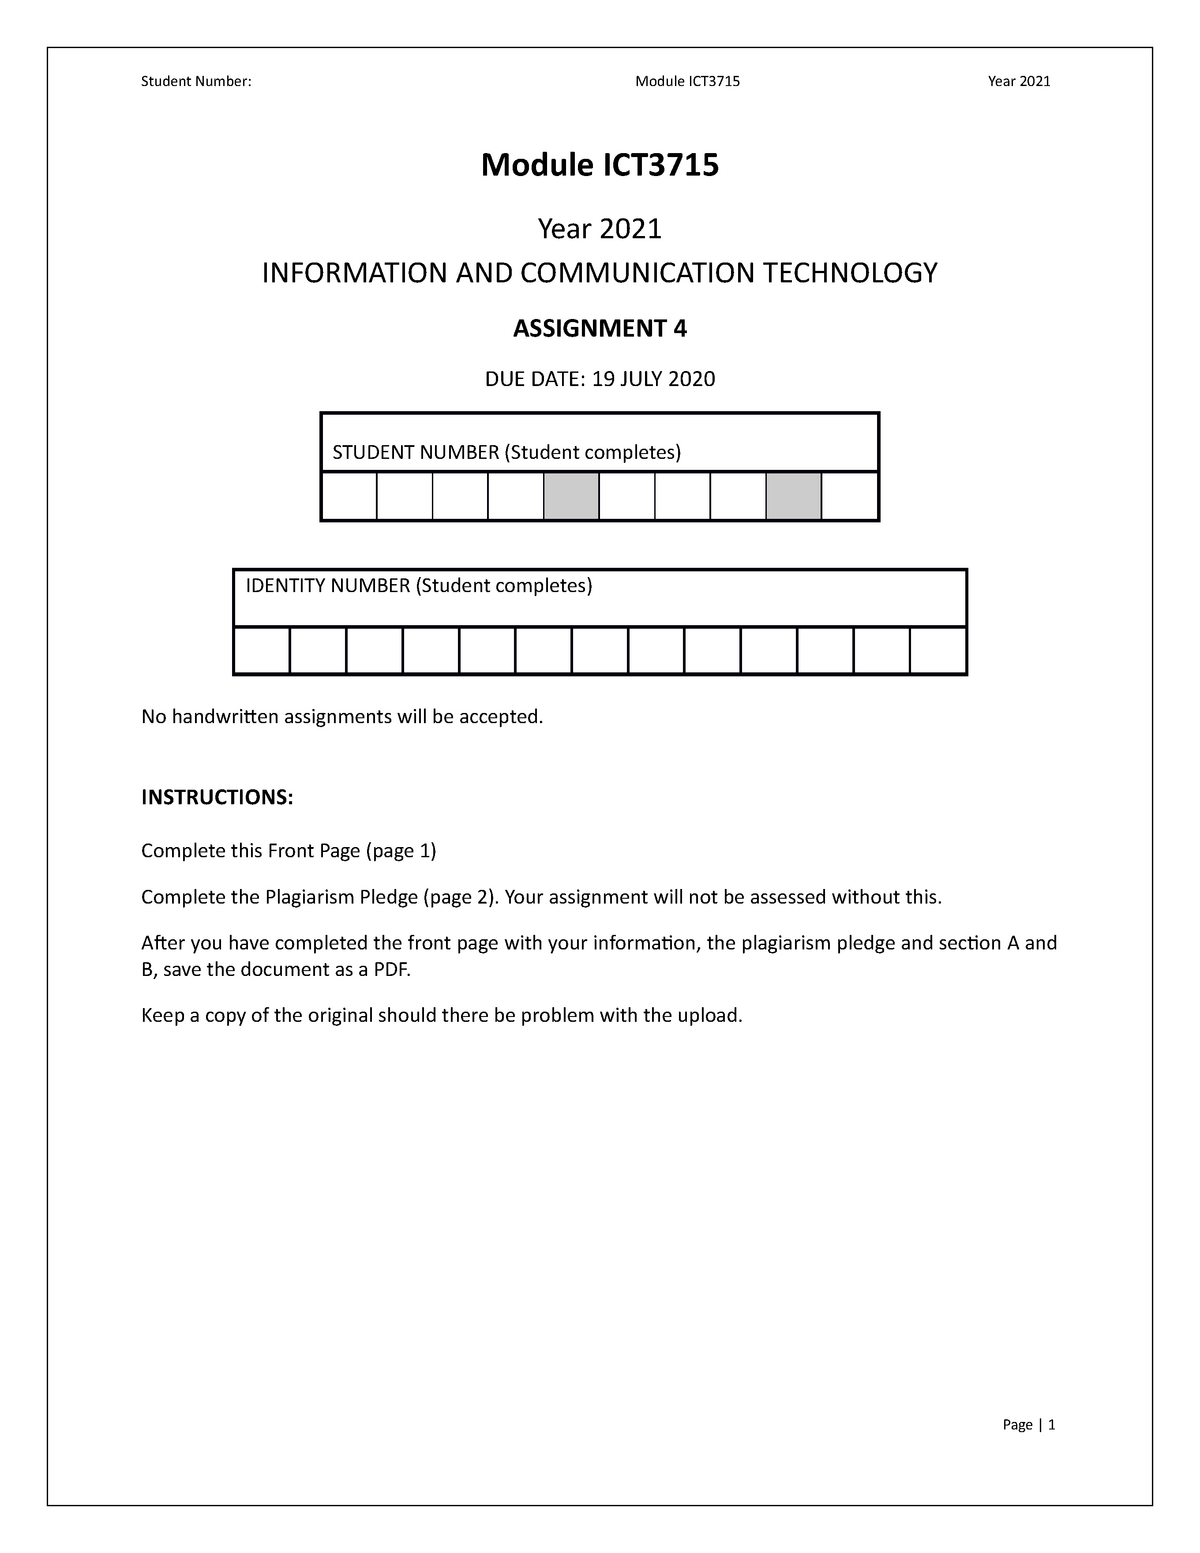 assignment on information technology